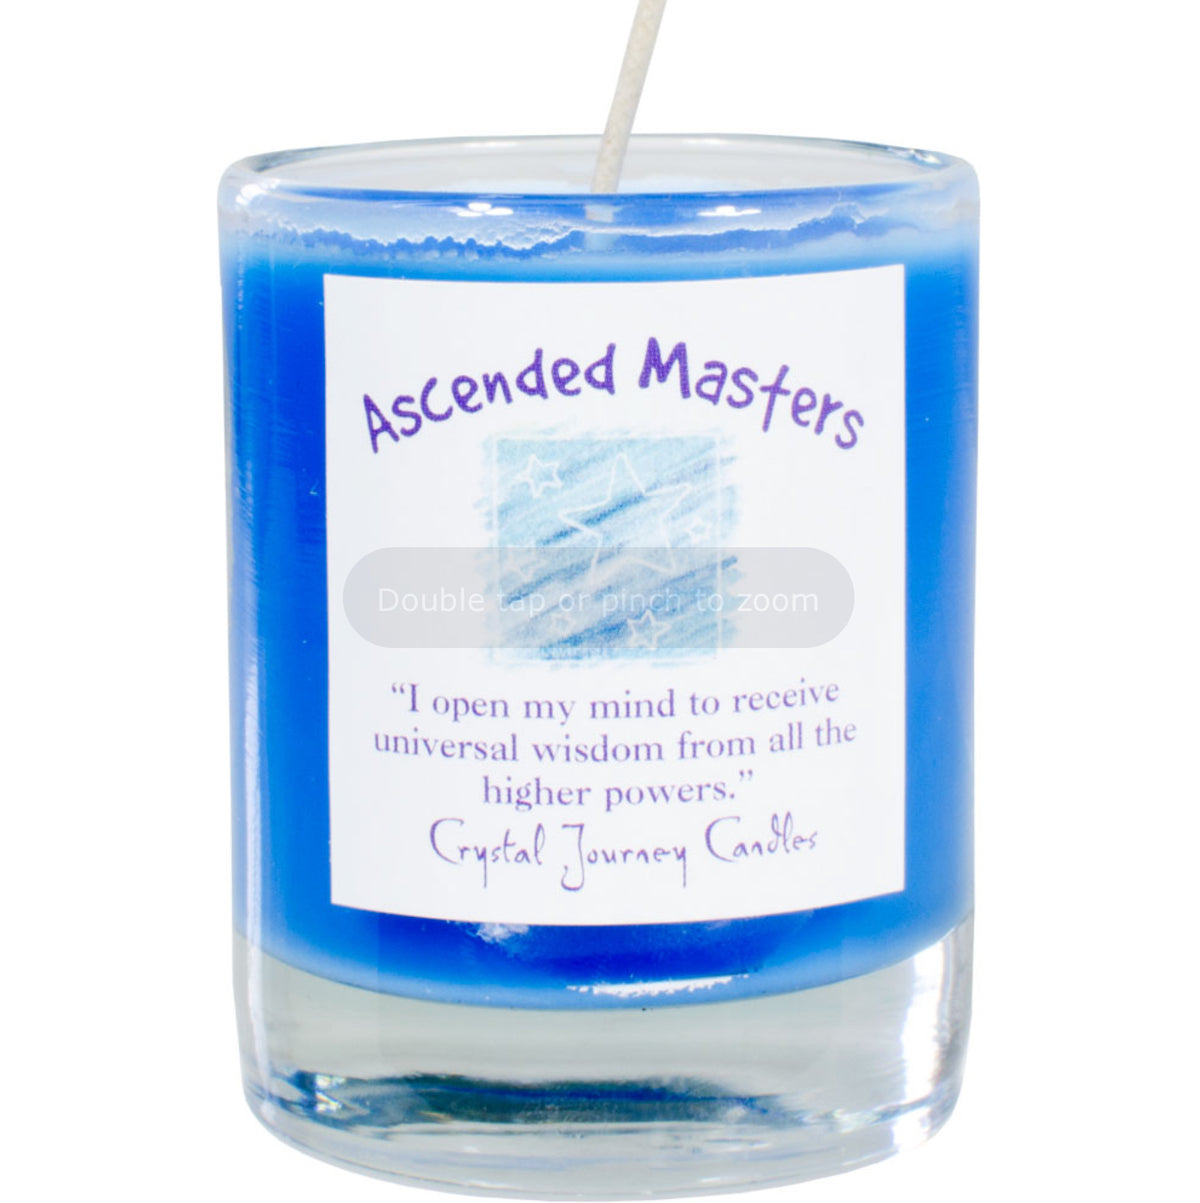 Ascended Masters Magic Votive Candle